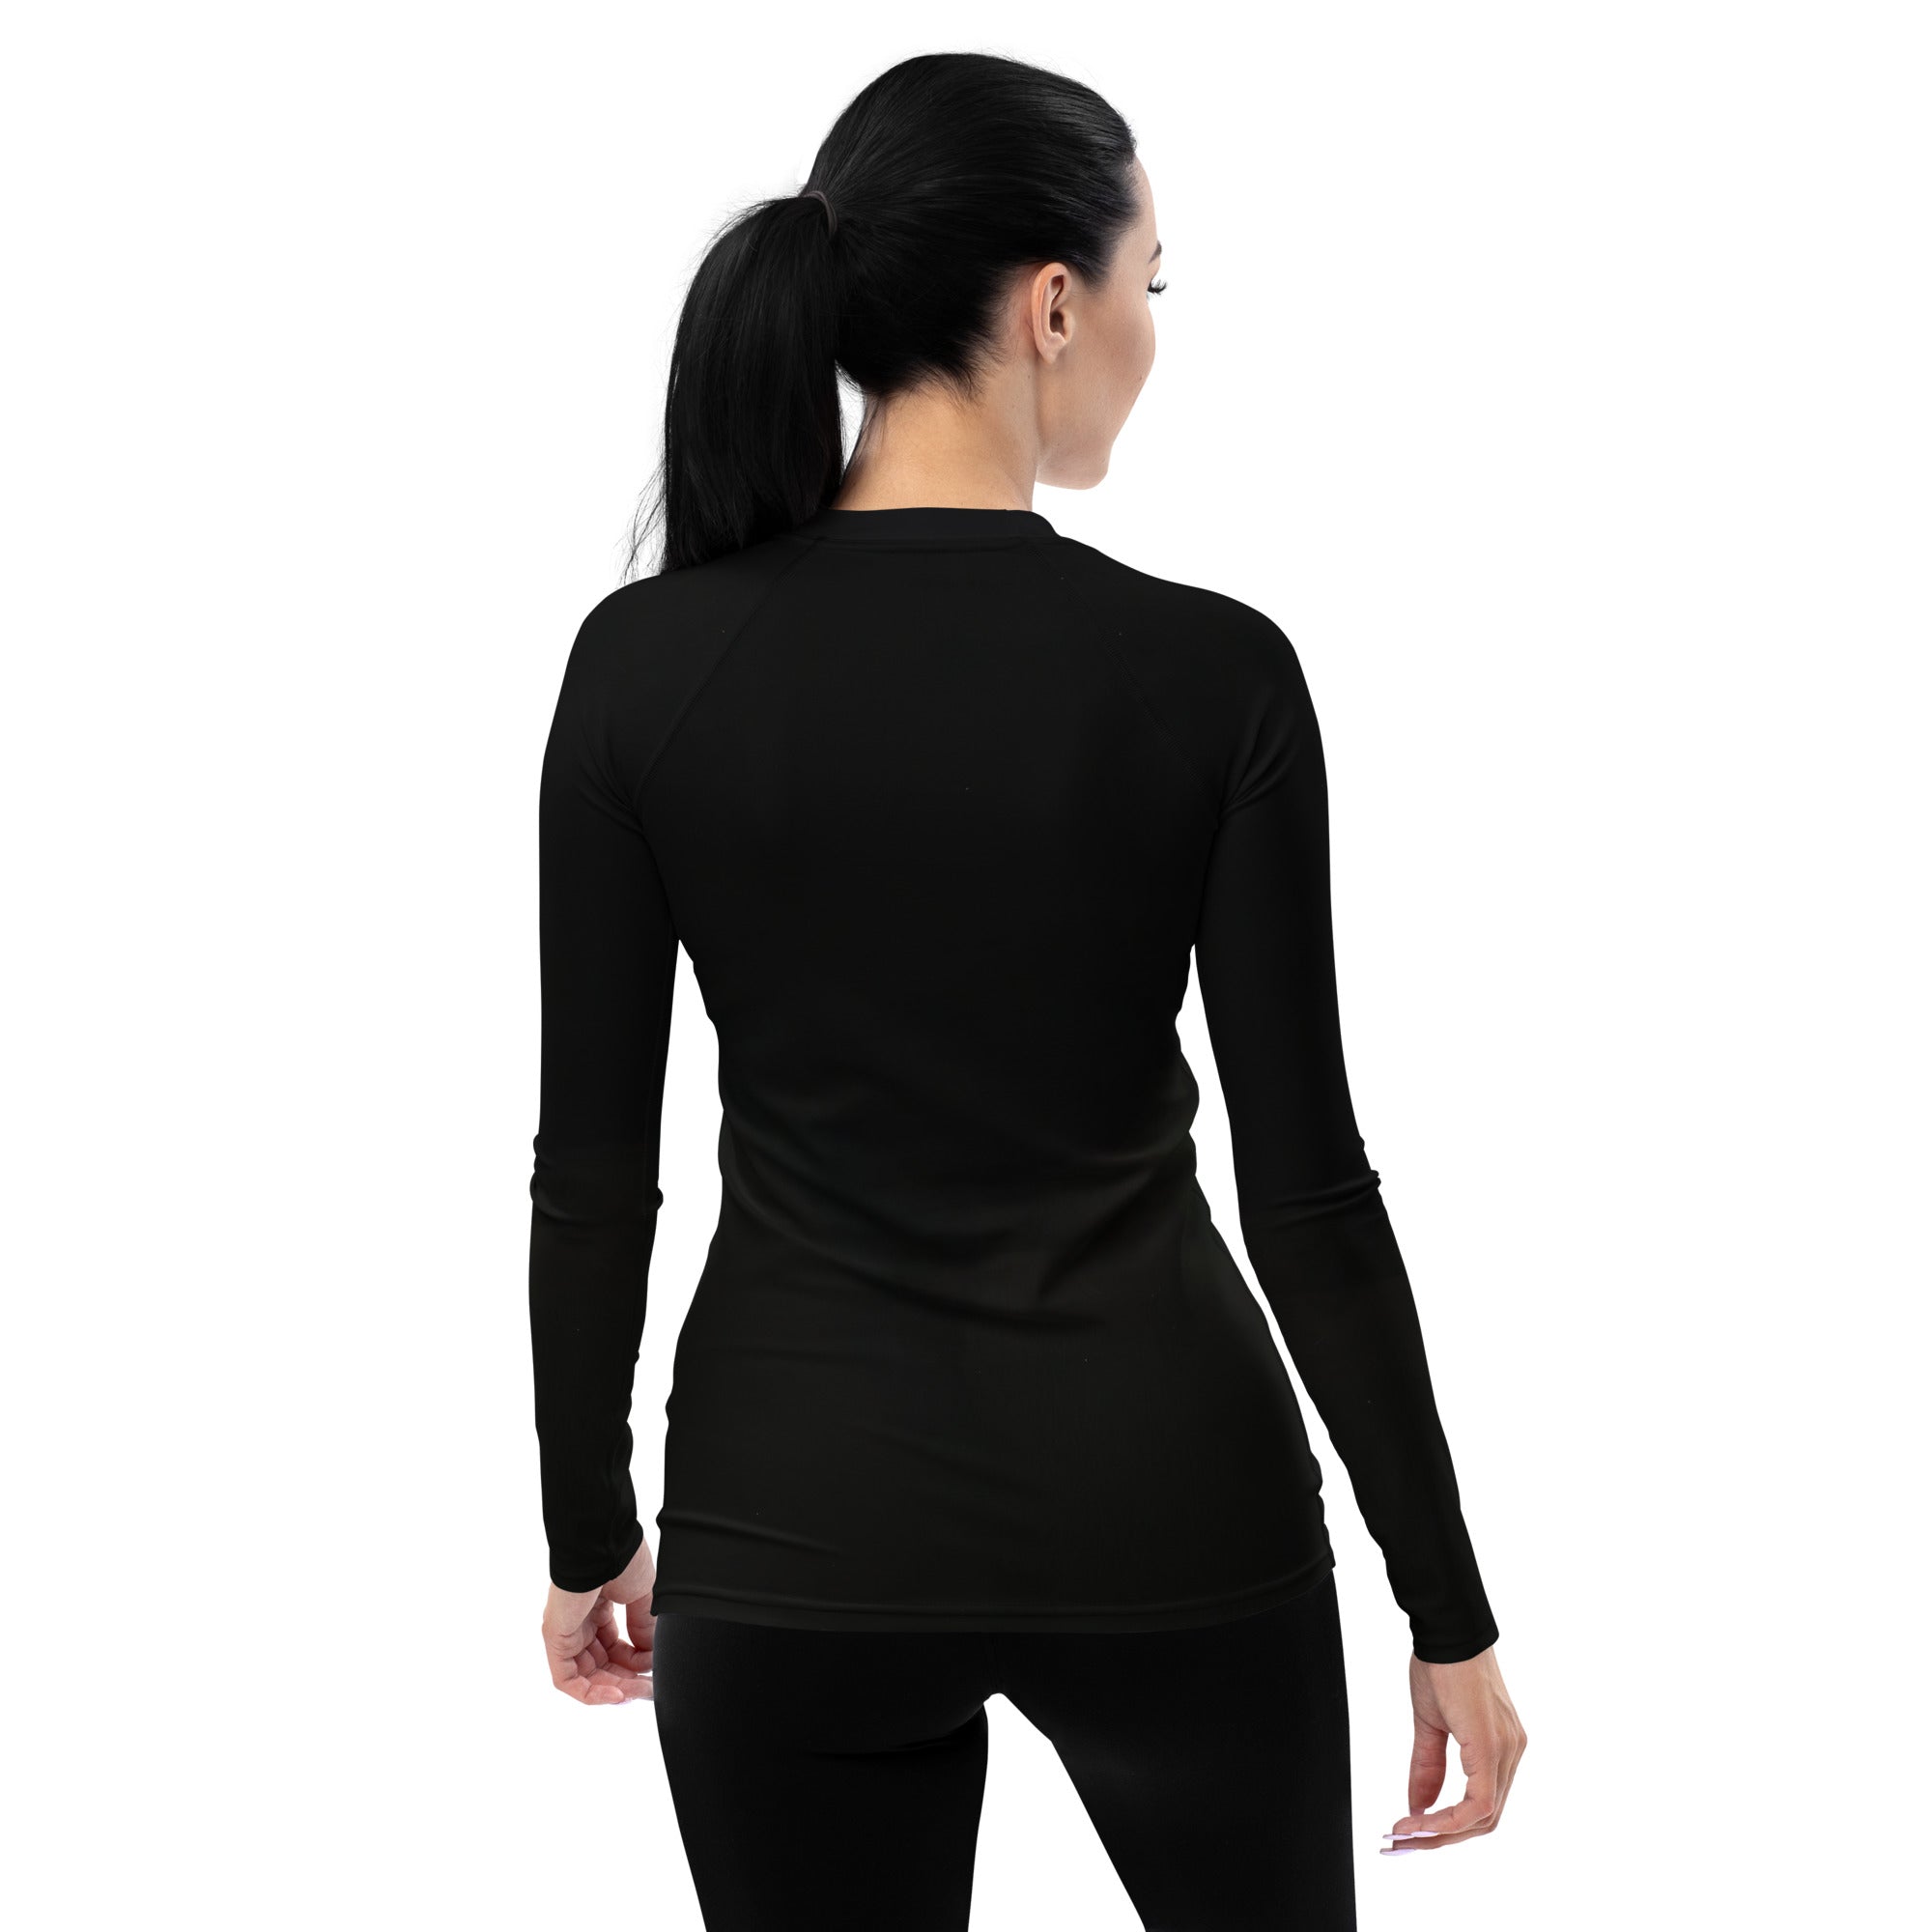 Detail view of Harmony Melodies women's rash guard fabric and fit.